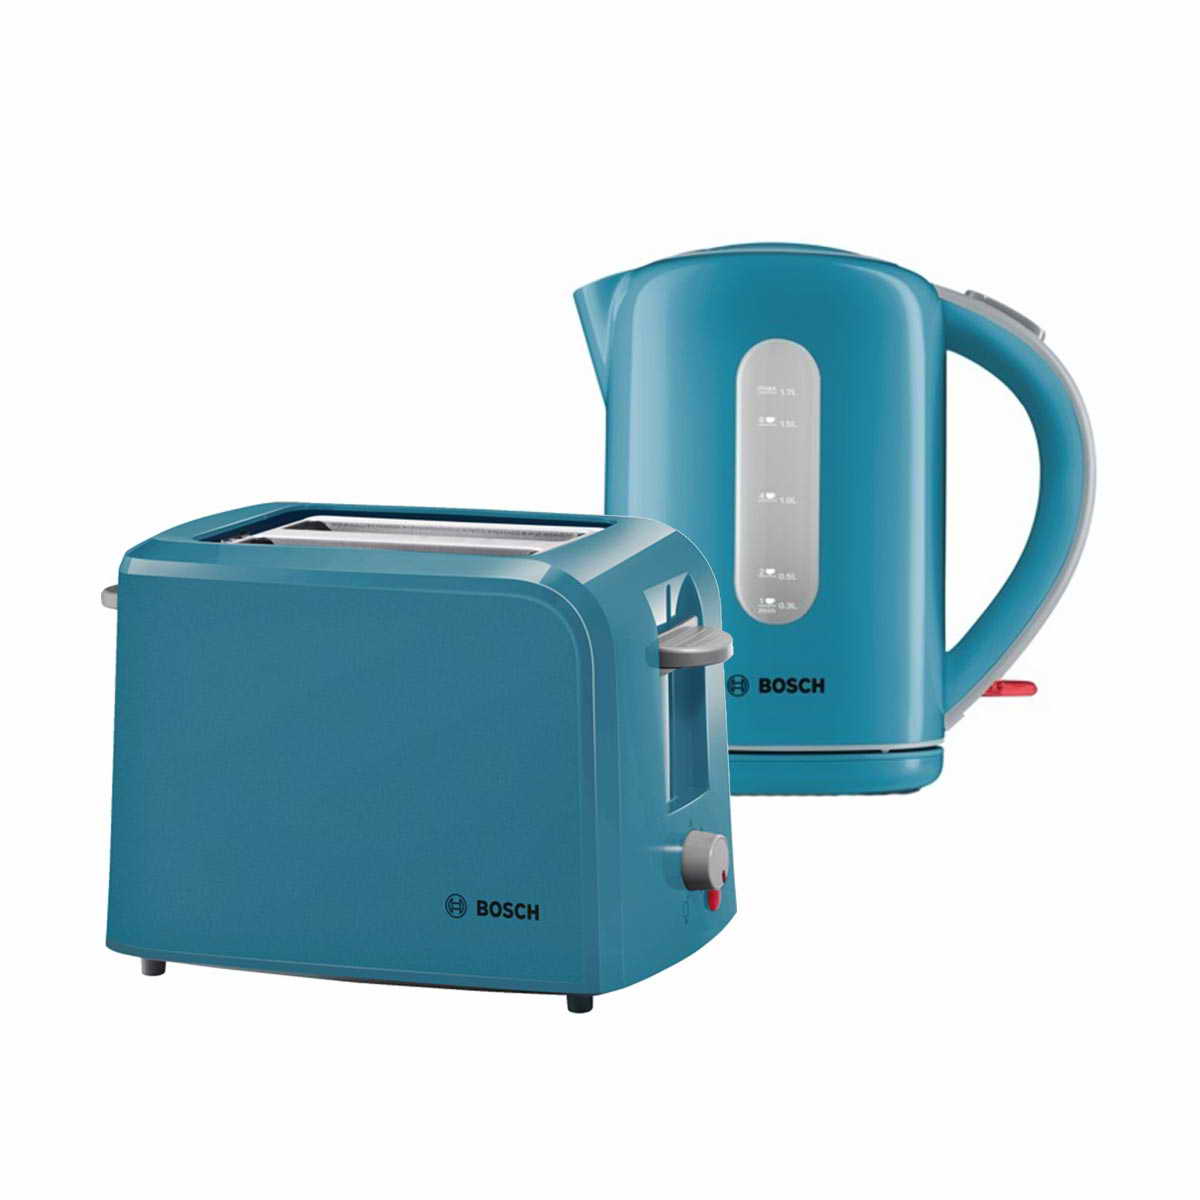 Bosch kettle and toaster set